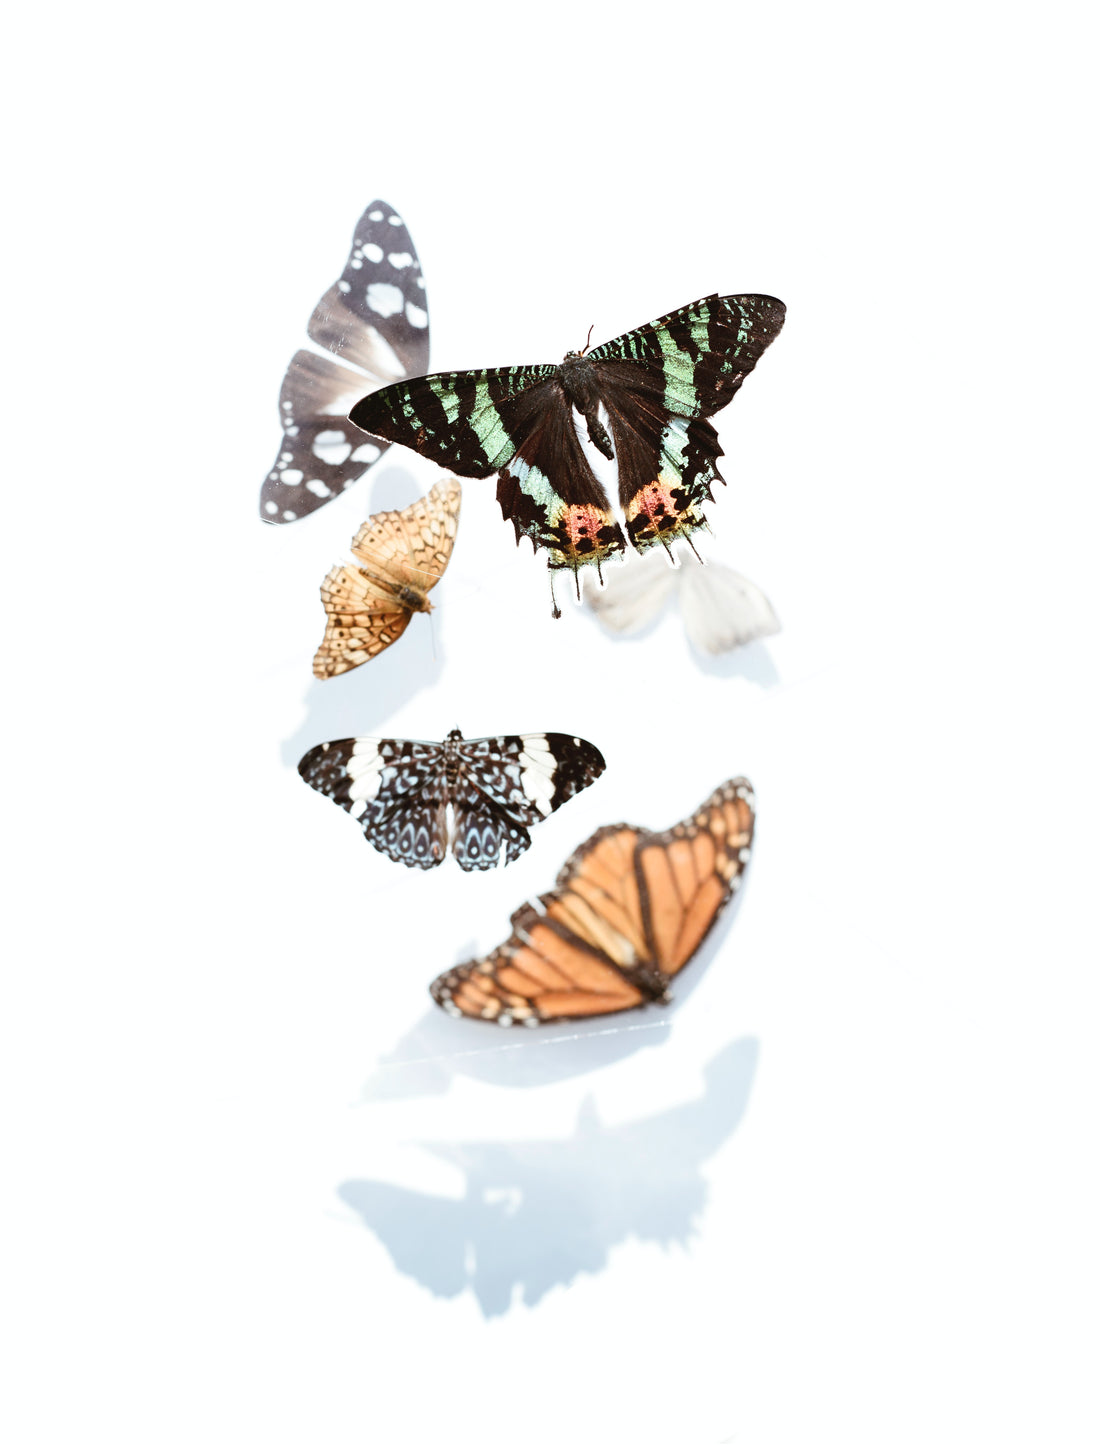 The Butterfly Effect of Clean: How Small Eco-Friendly Choices Lead to Big Changes